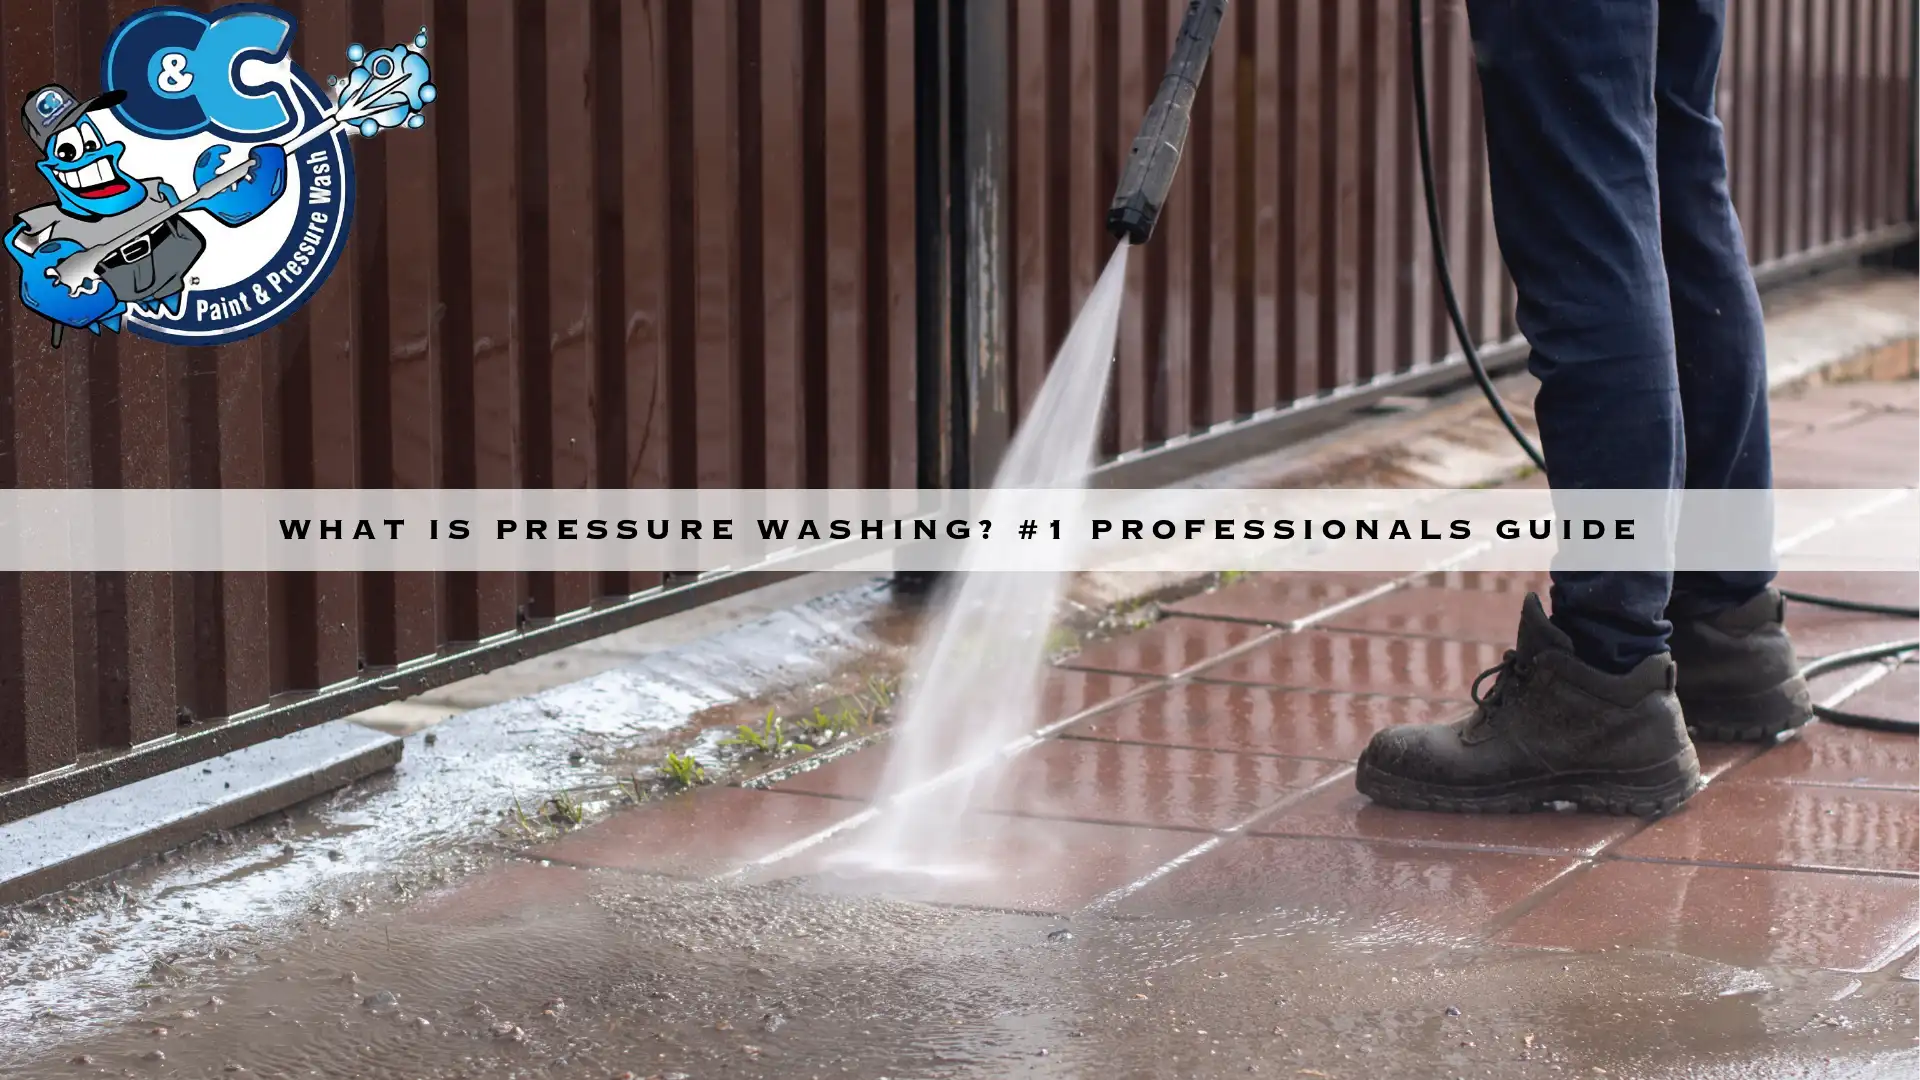 What is Pressure Washing? #1 Professionals Guide - Alt Text